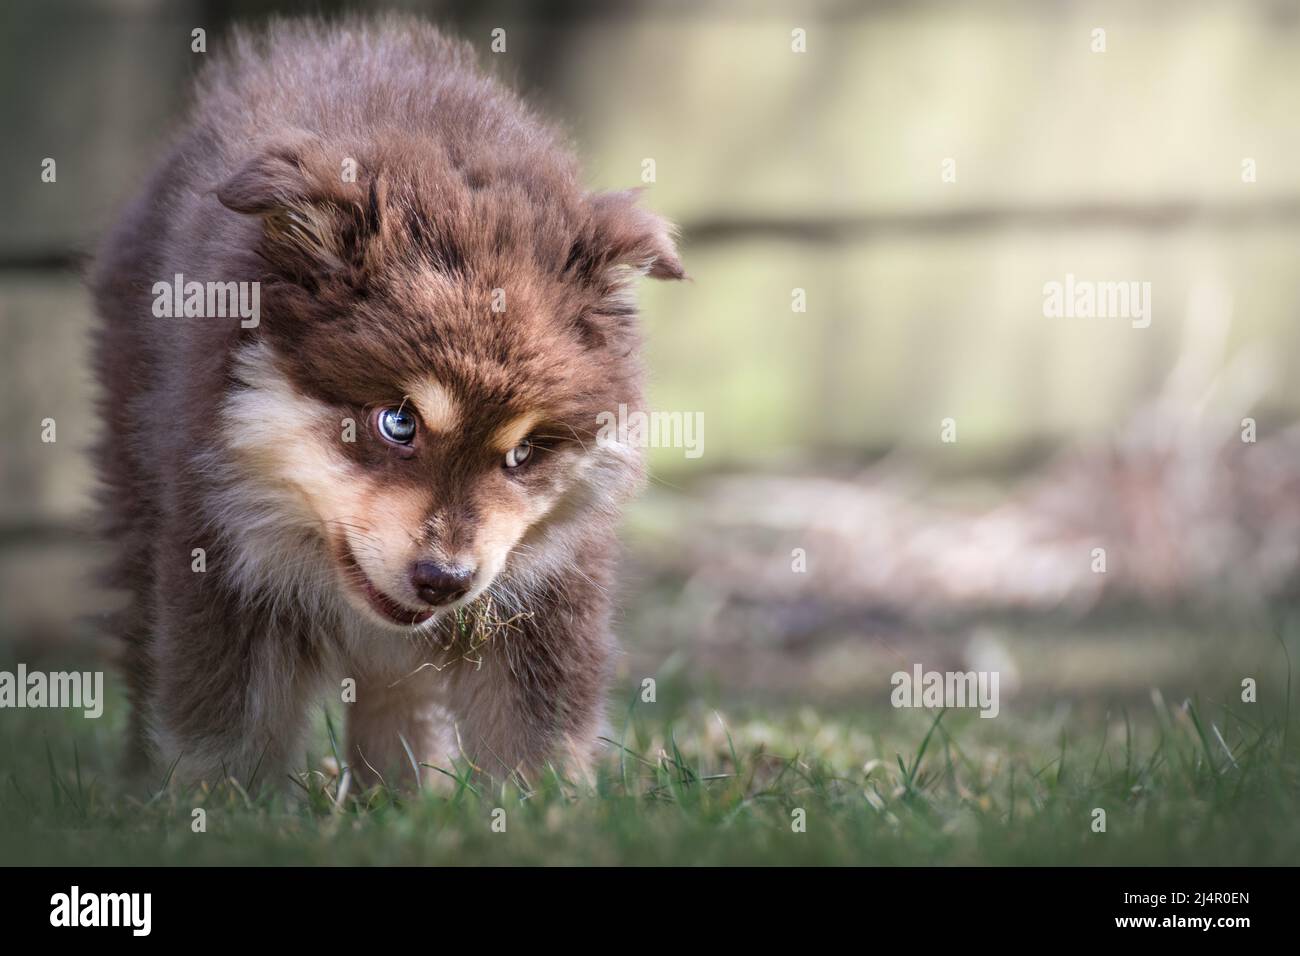 Portrait of a brown Finnish Lapphund puppy and dog outdoors Stock Photo